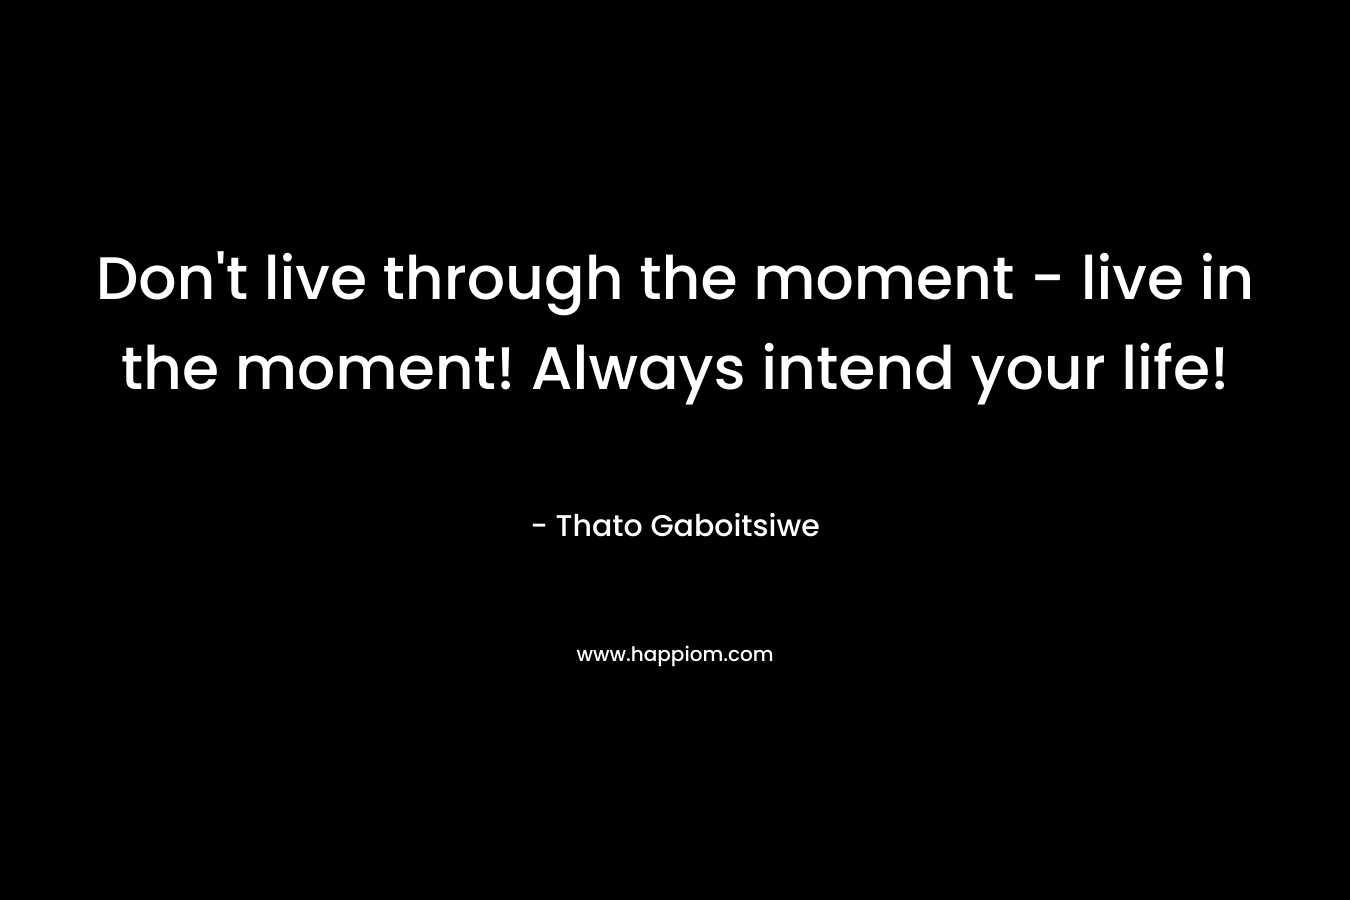 Don't live through the moment - live in the moment! Always intend your life!